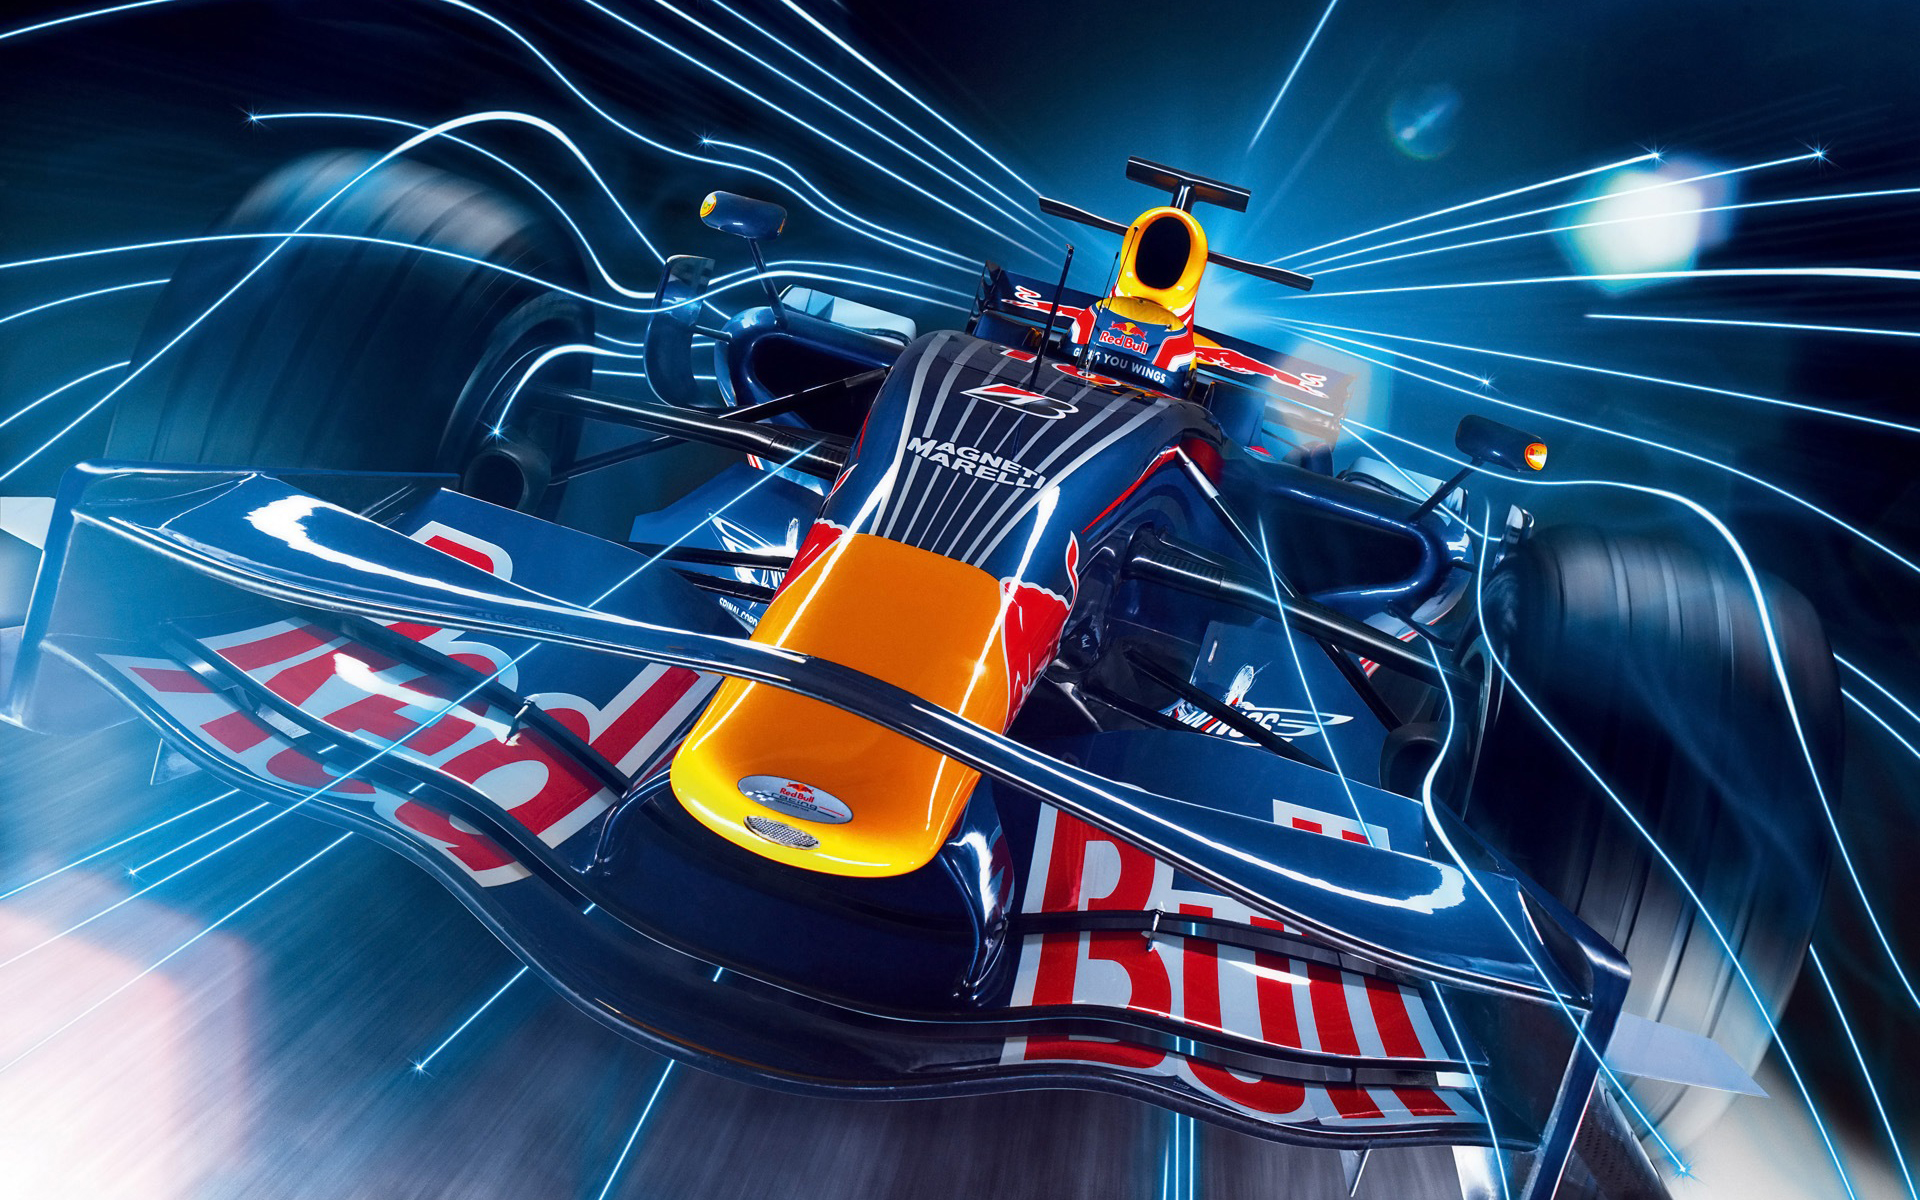 2010 red bull f1 download free